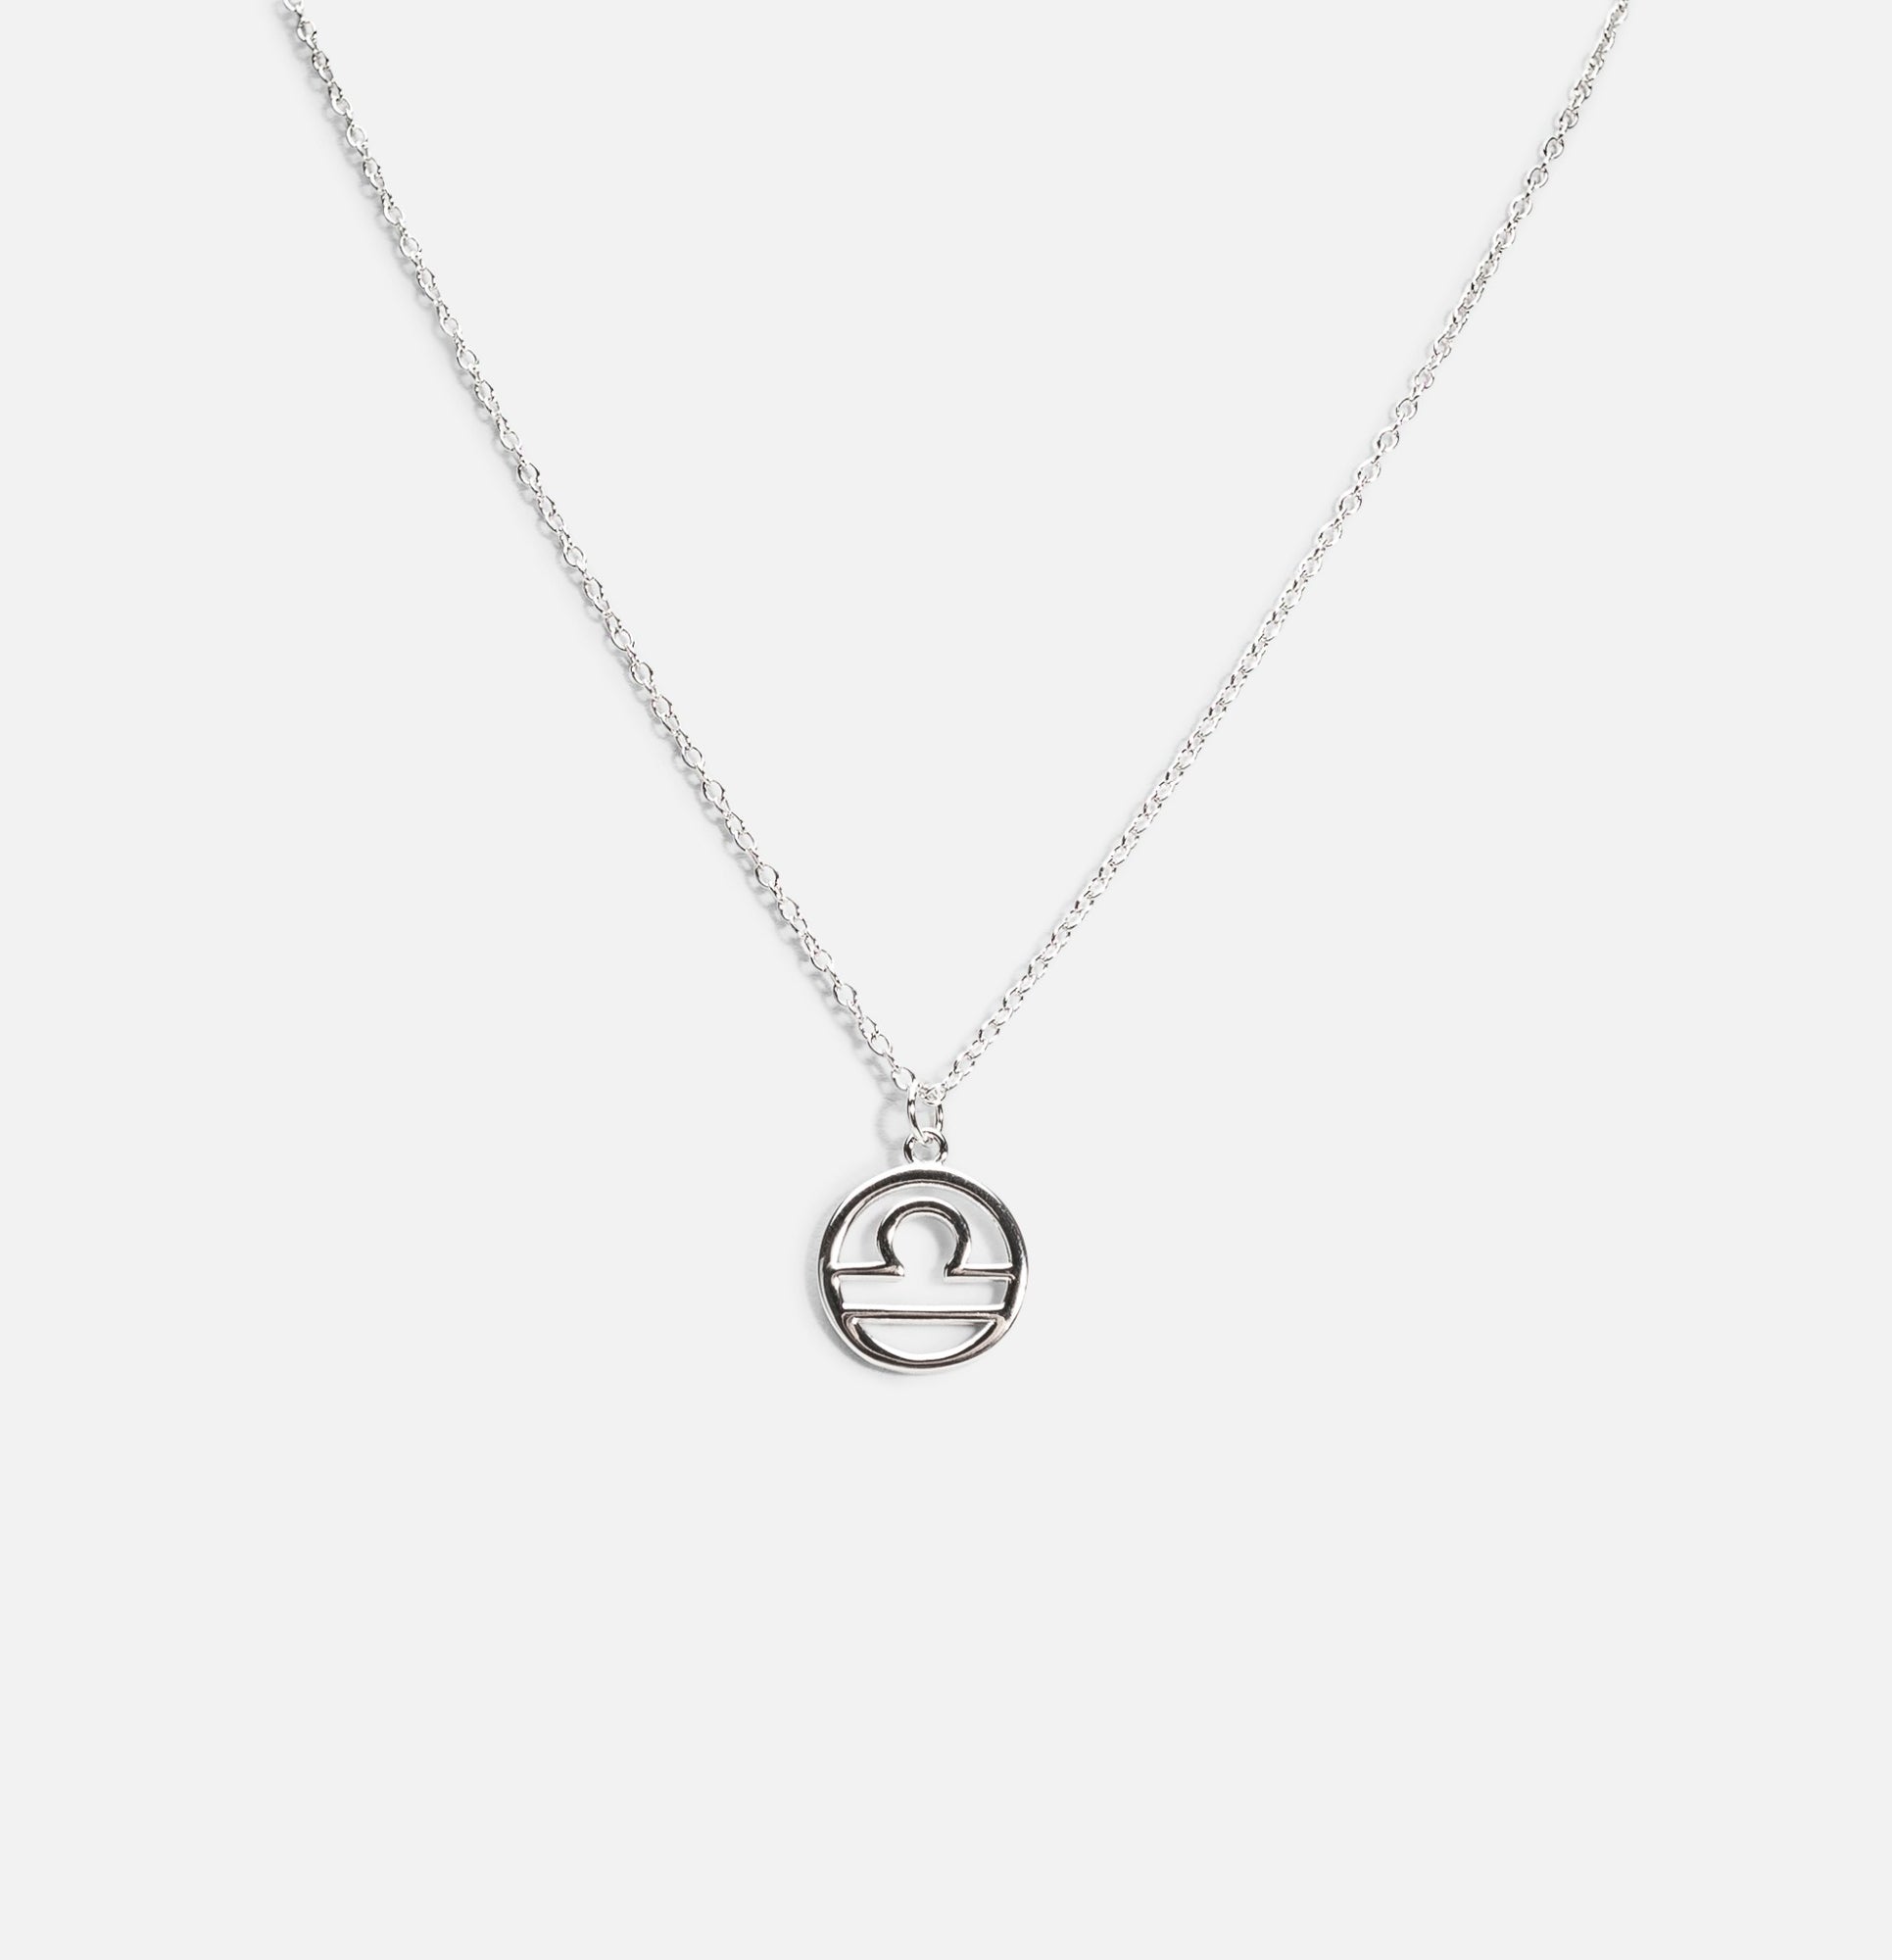 Sterling silver pendant with libra zodiac sign